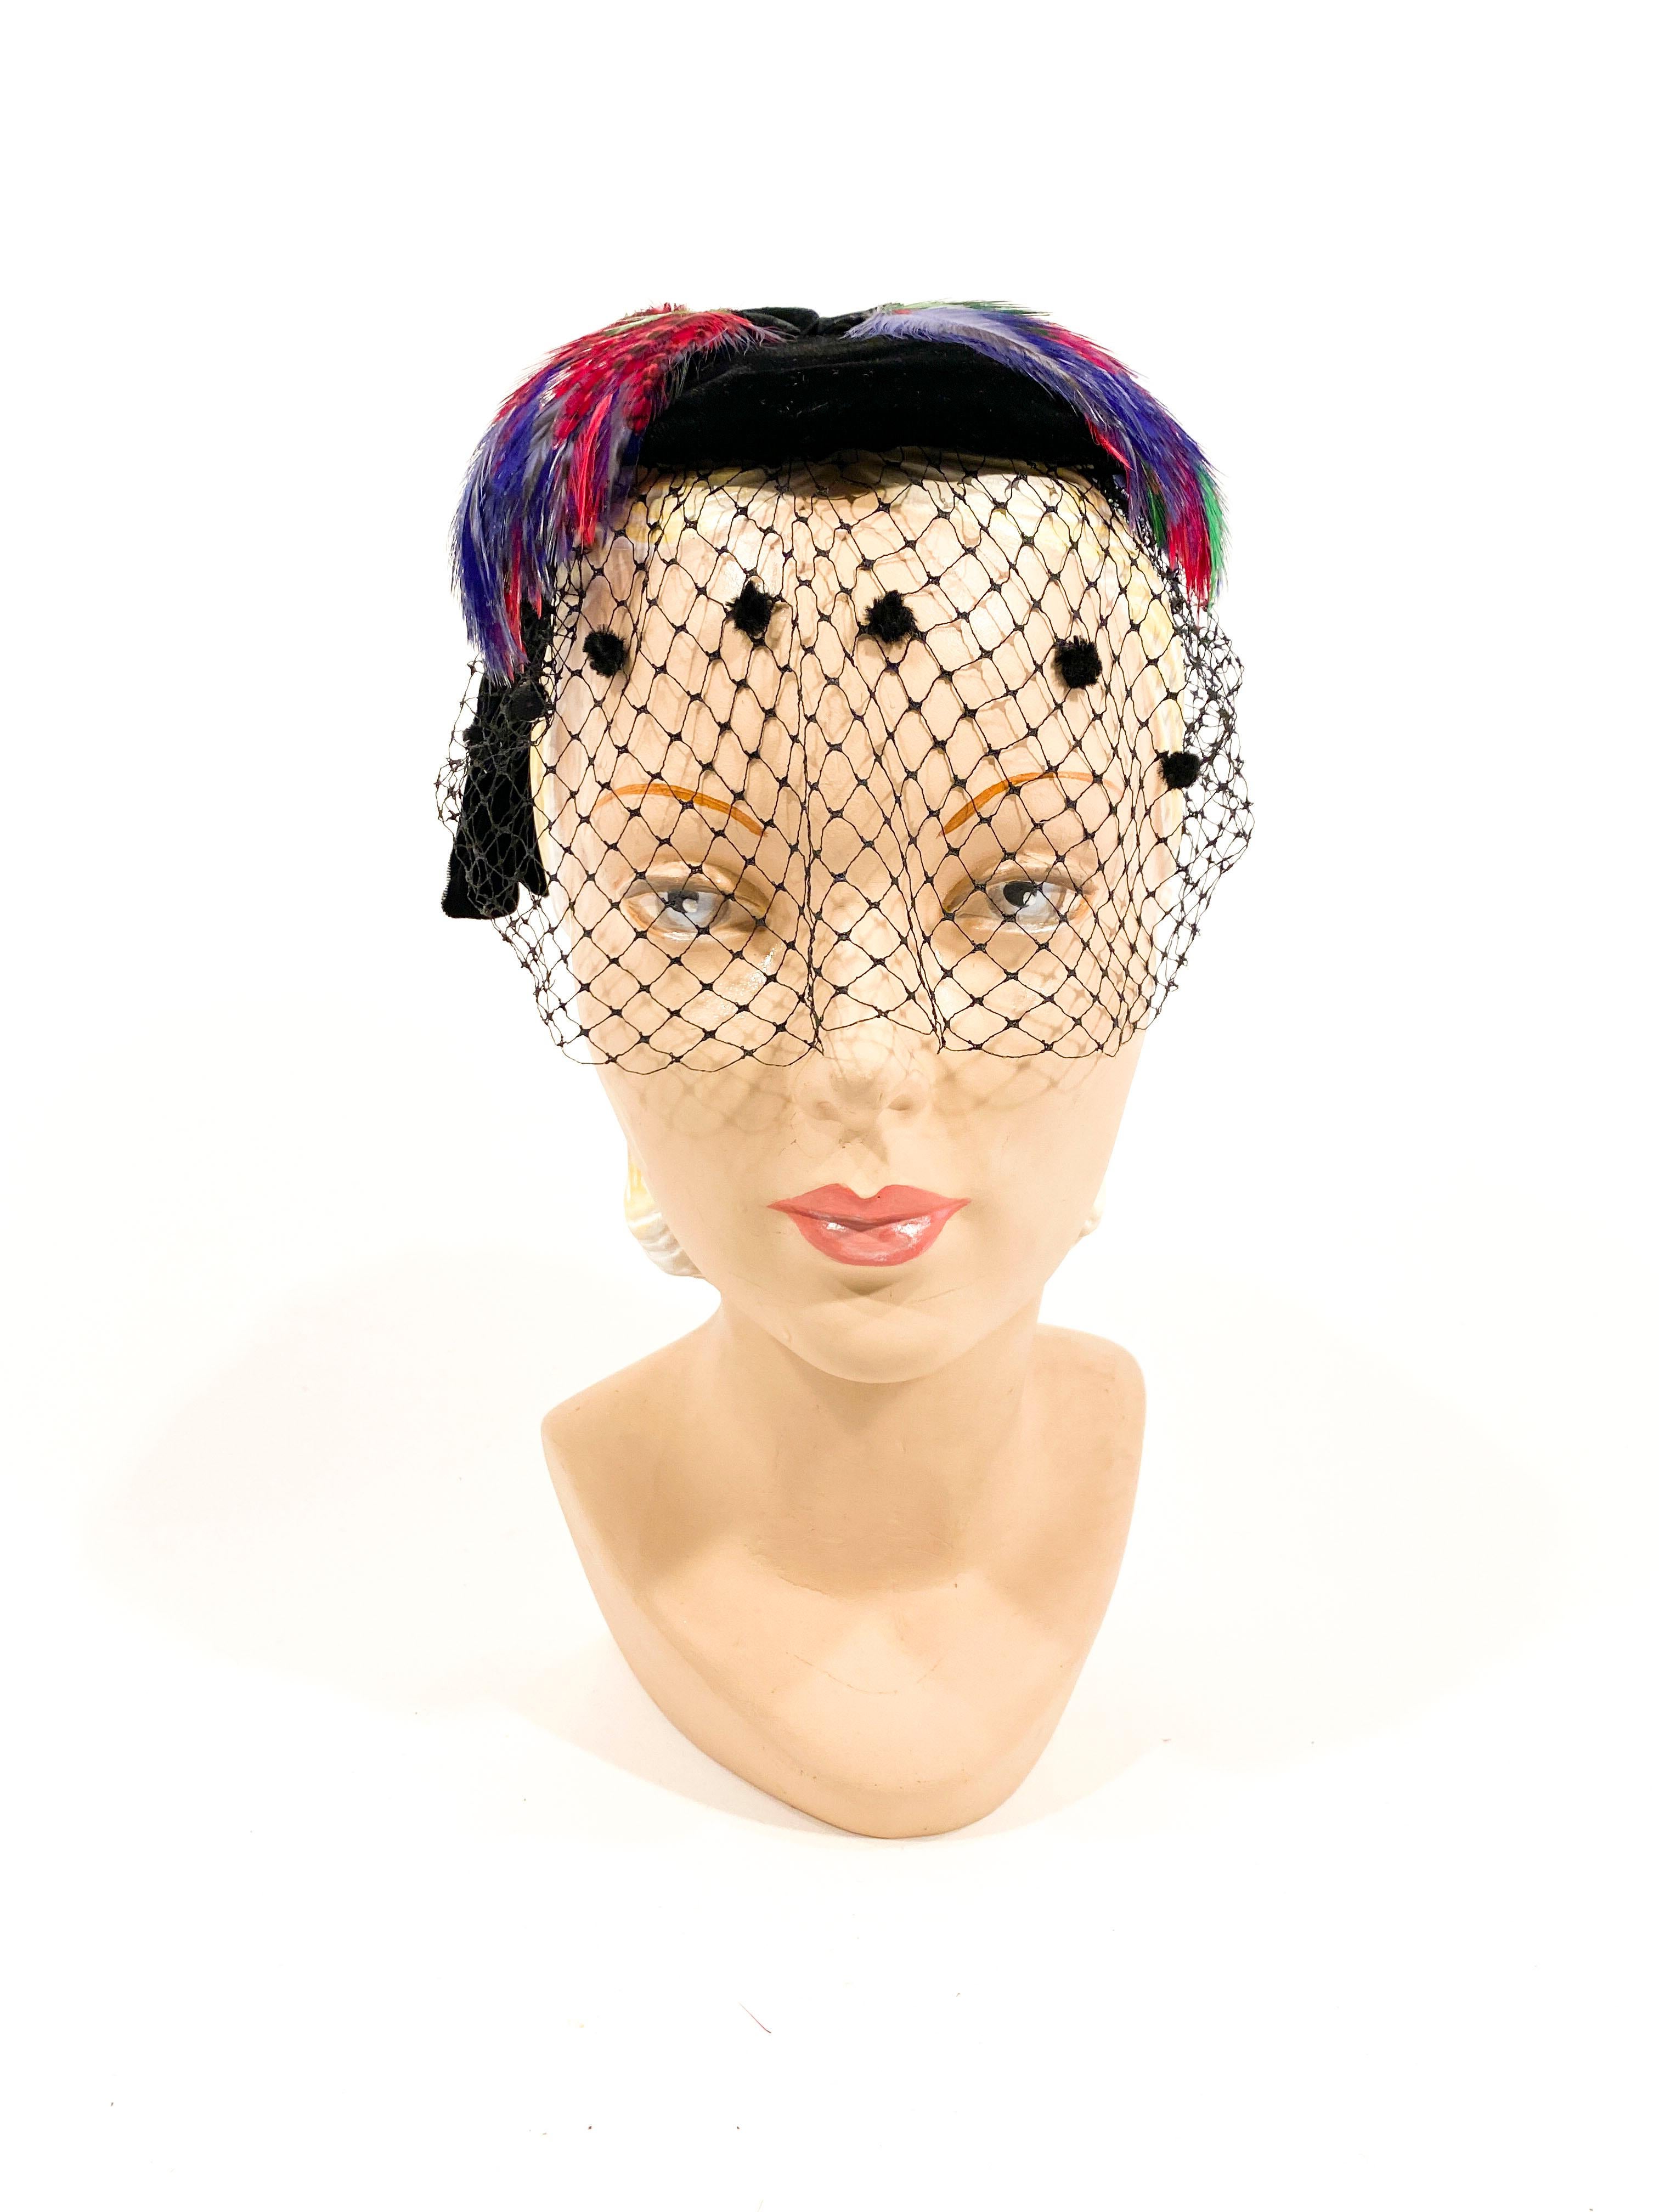 194s black silk velvet cocktail hat with handmade decorative loops adorning the back of the head. The top is decorated with multi-colored feathers and front has a veil accented with small velvet tuffs. The interior has a comb to secure the hat to